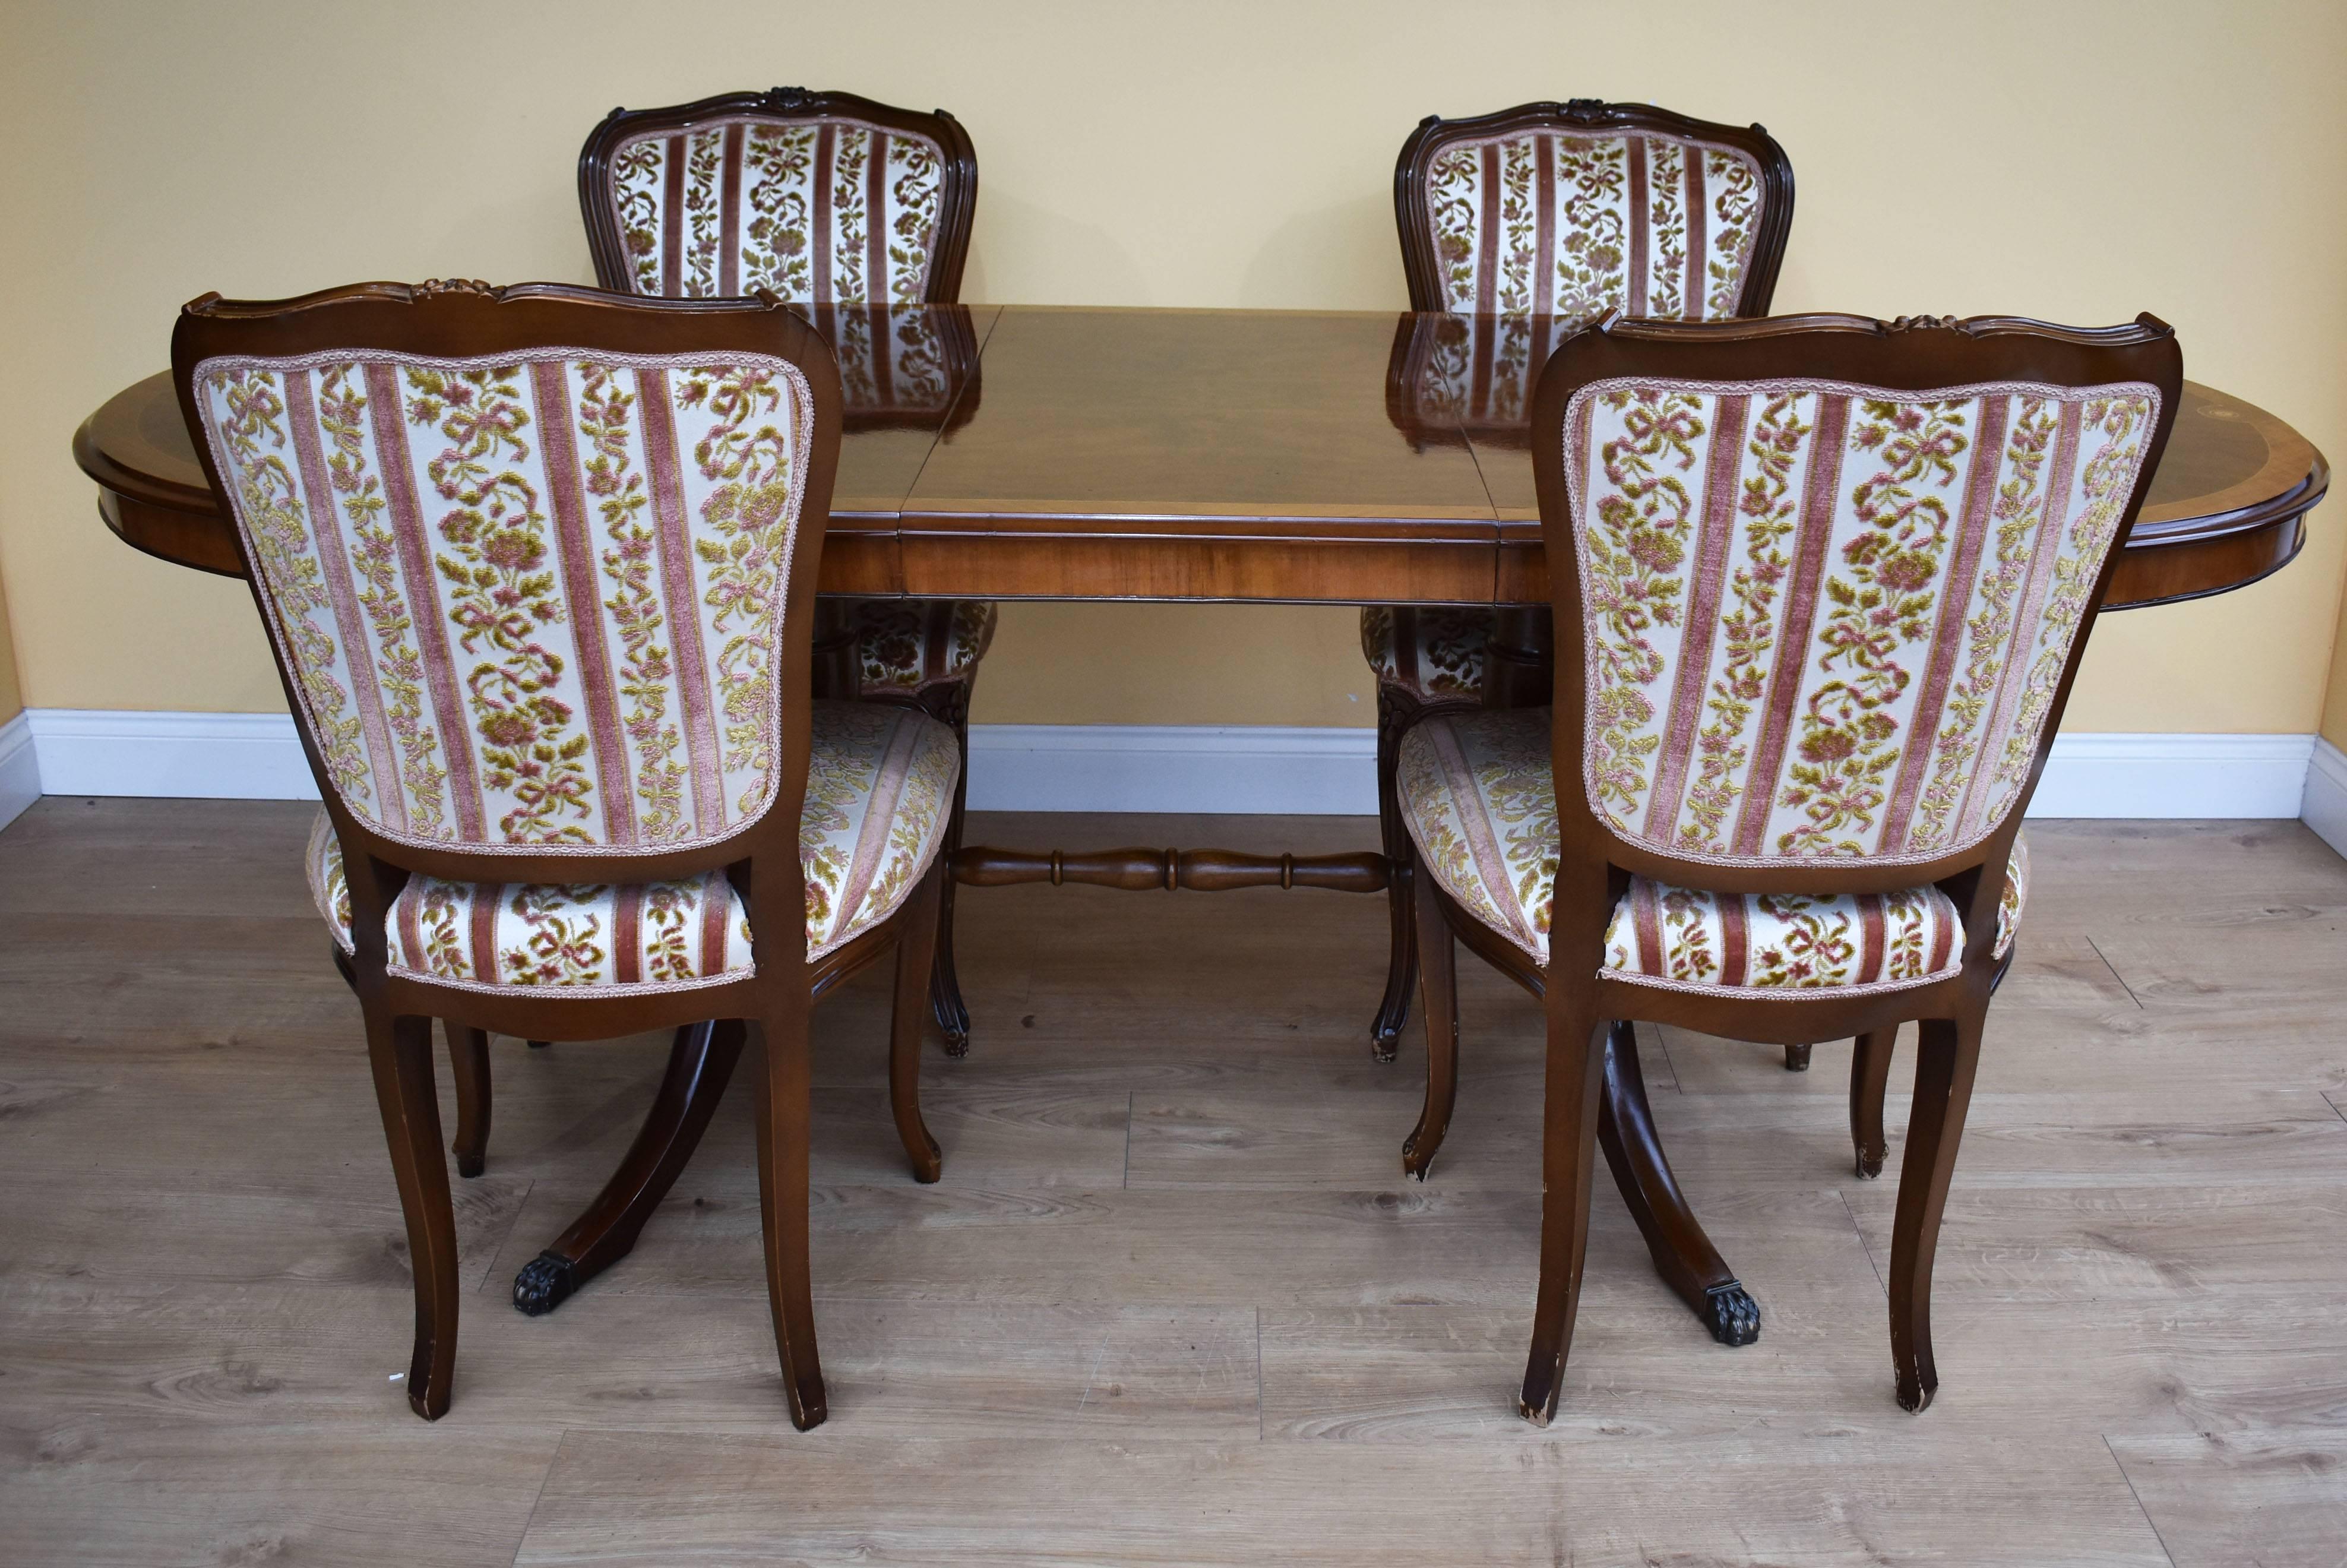 For sale is a fine quality Burr walnut dining table and six walnut dining chairs. The table has an additional leaf and stands on two pedestals, each with sweeping legs terminating on lions paw castors. The chairs have ornate carving to the top,